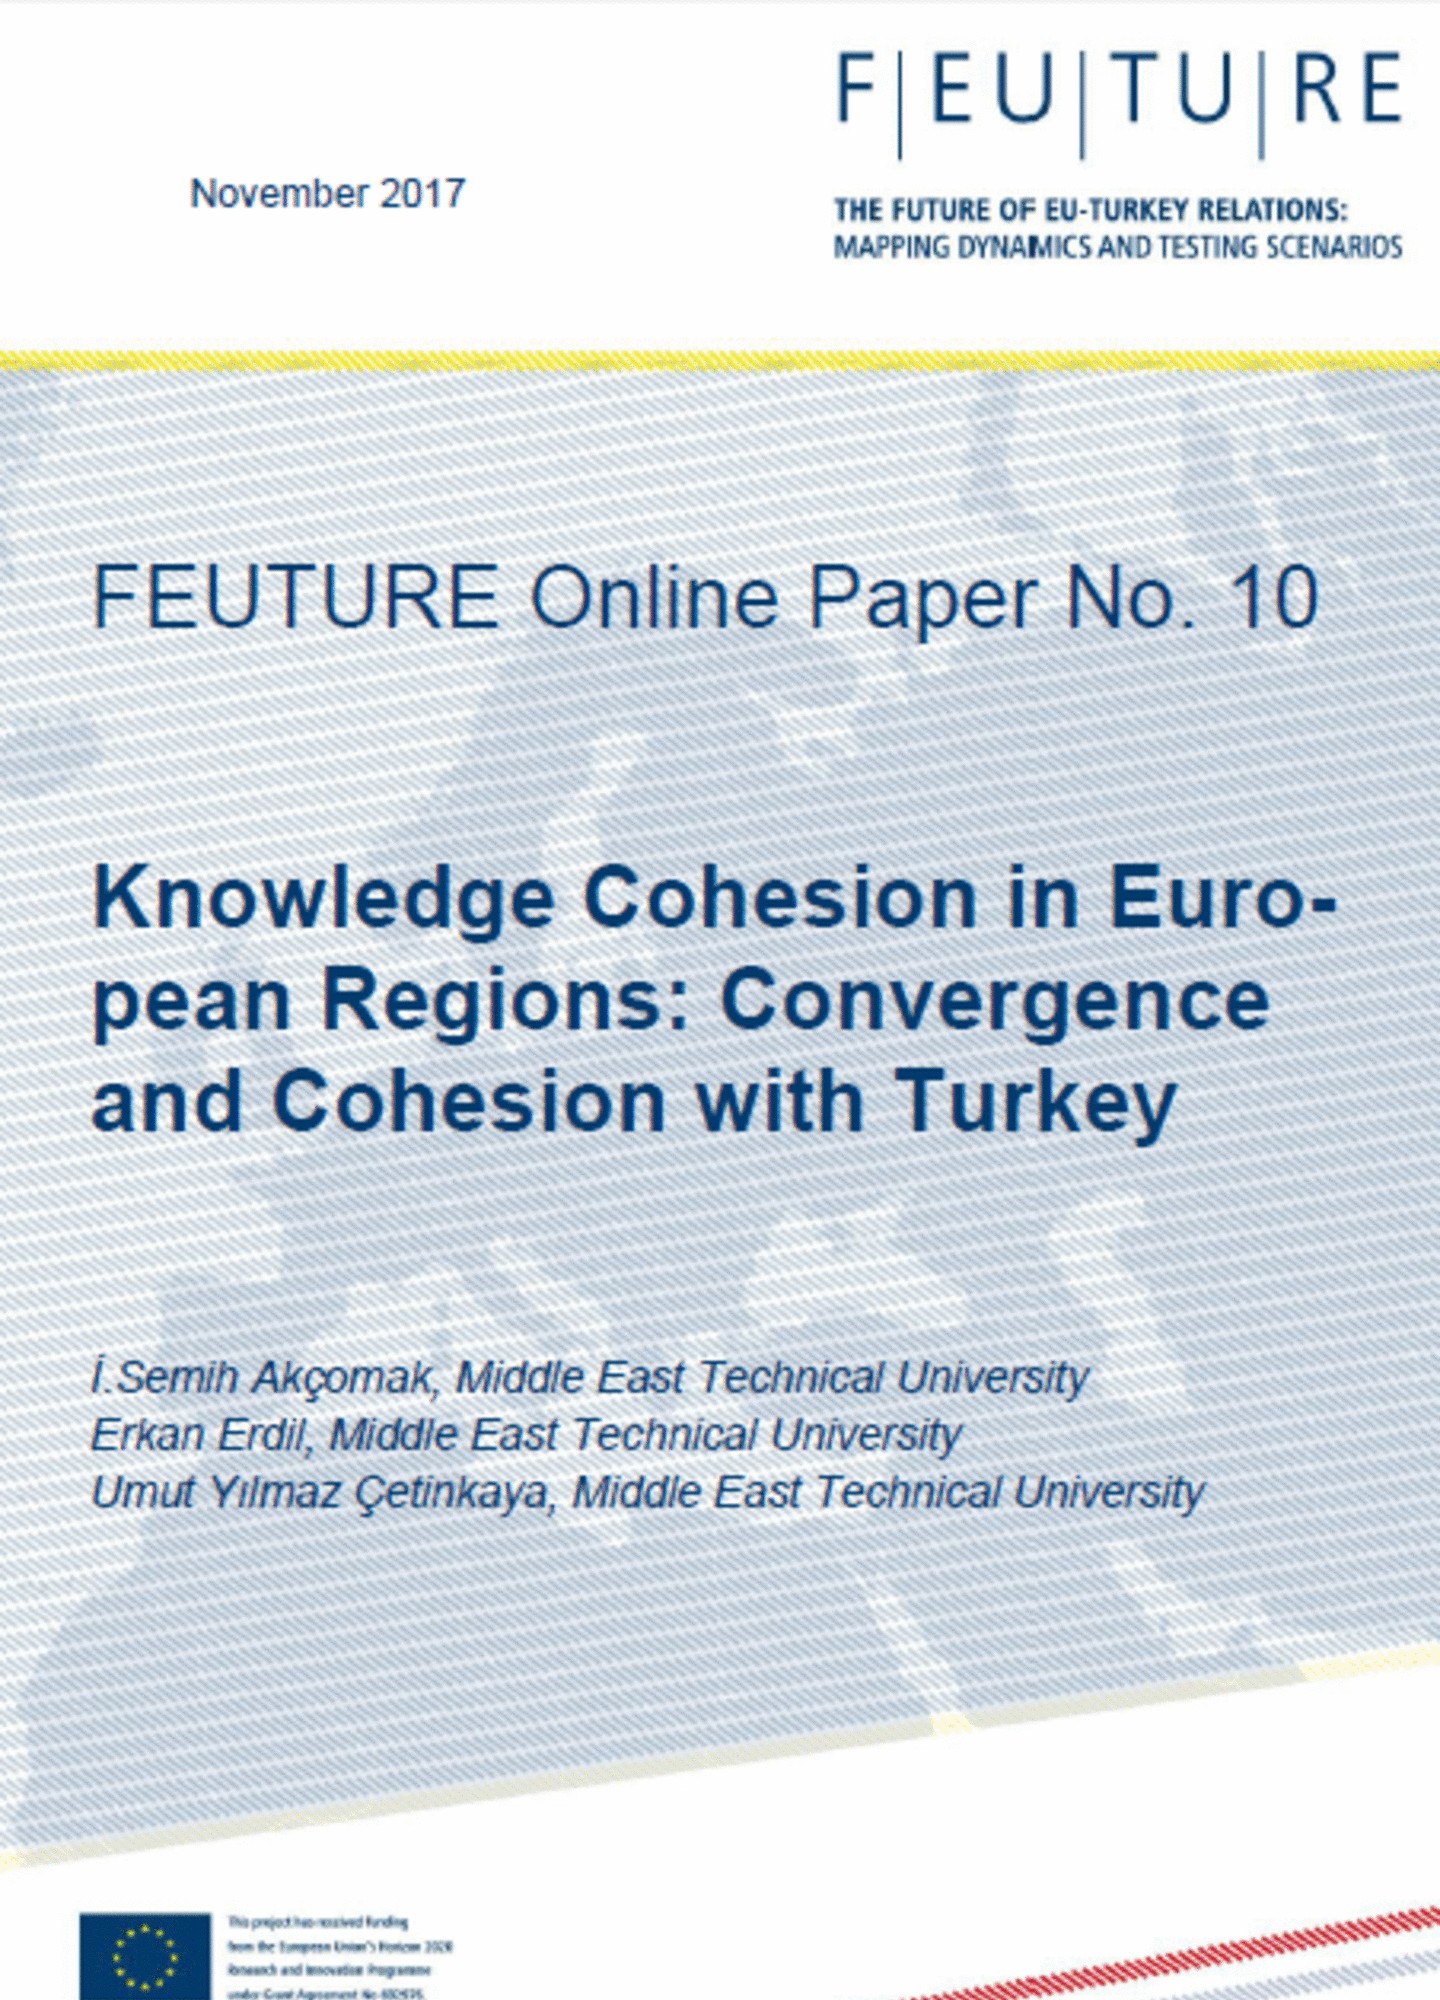 Knowledge Cohesion in European Regions: Convergence and Cohesion with Turkey